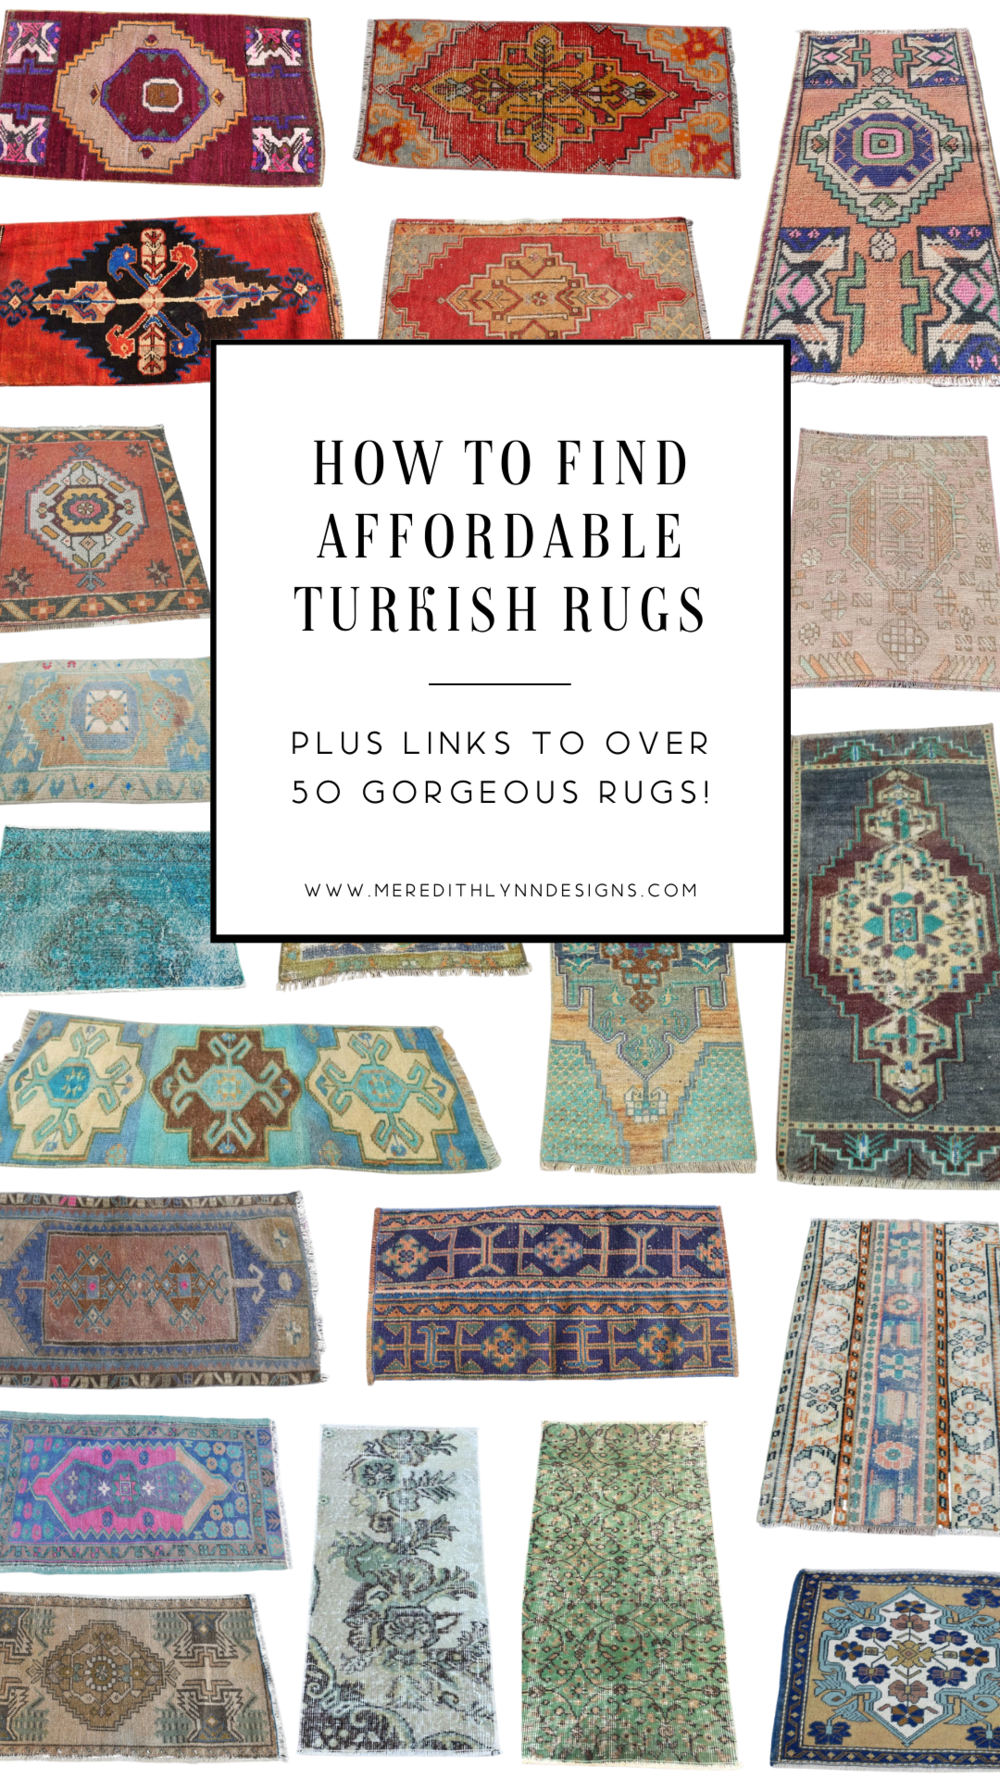 How To Find Affordable Vintage Turkish, Affordable Vintage Persian Rugs